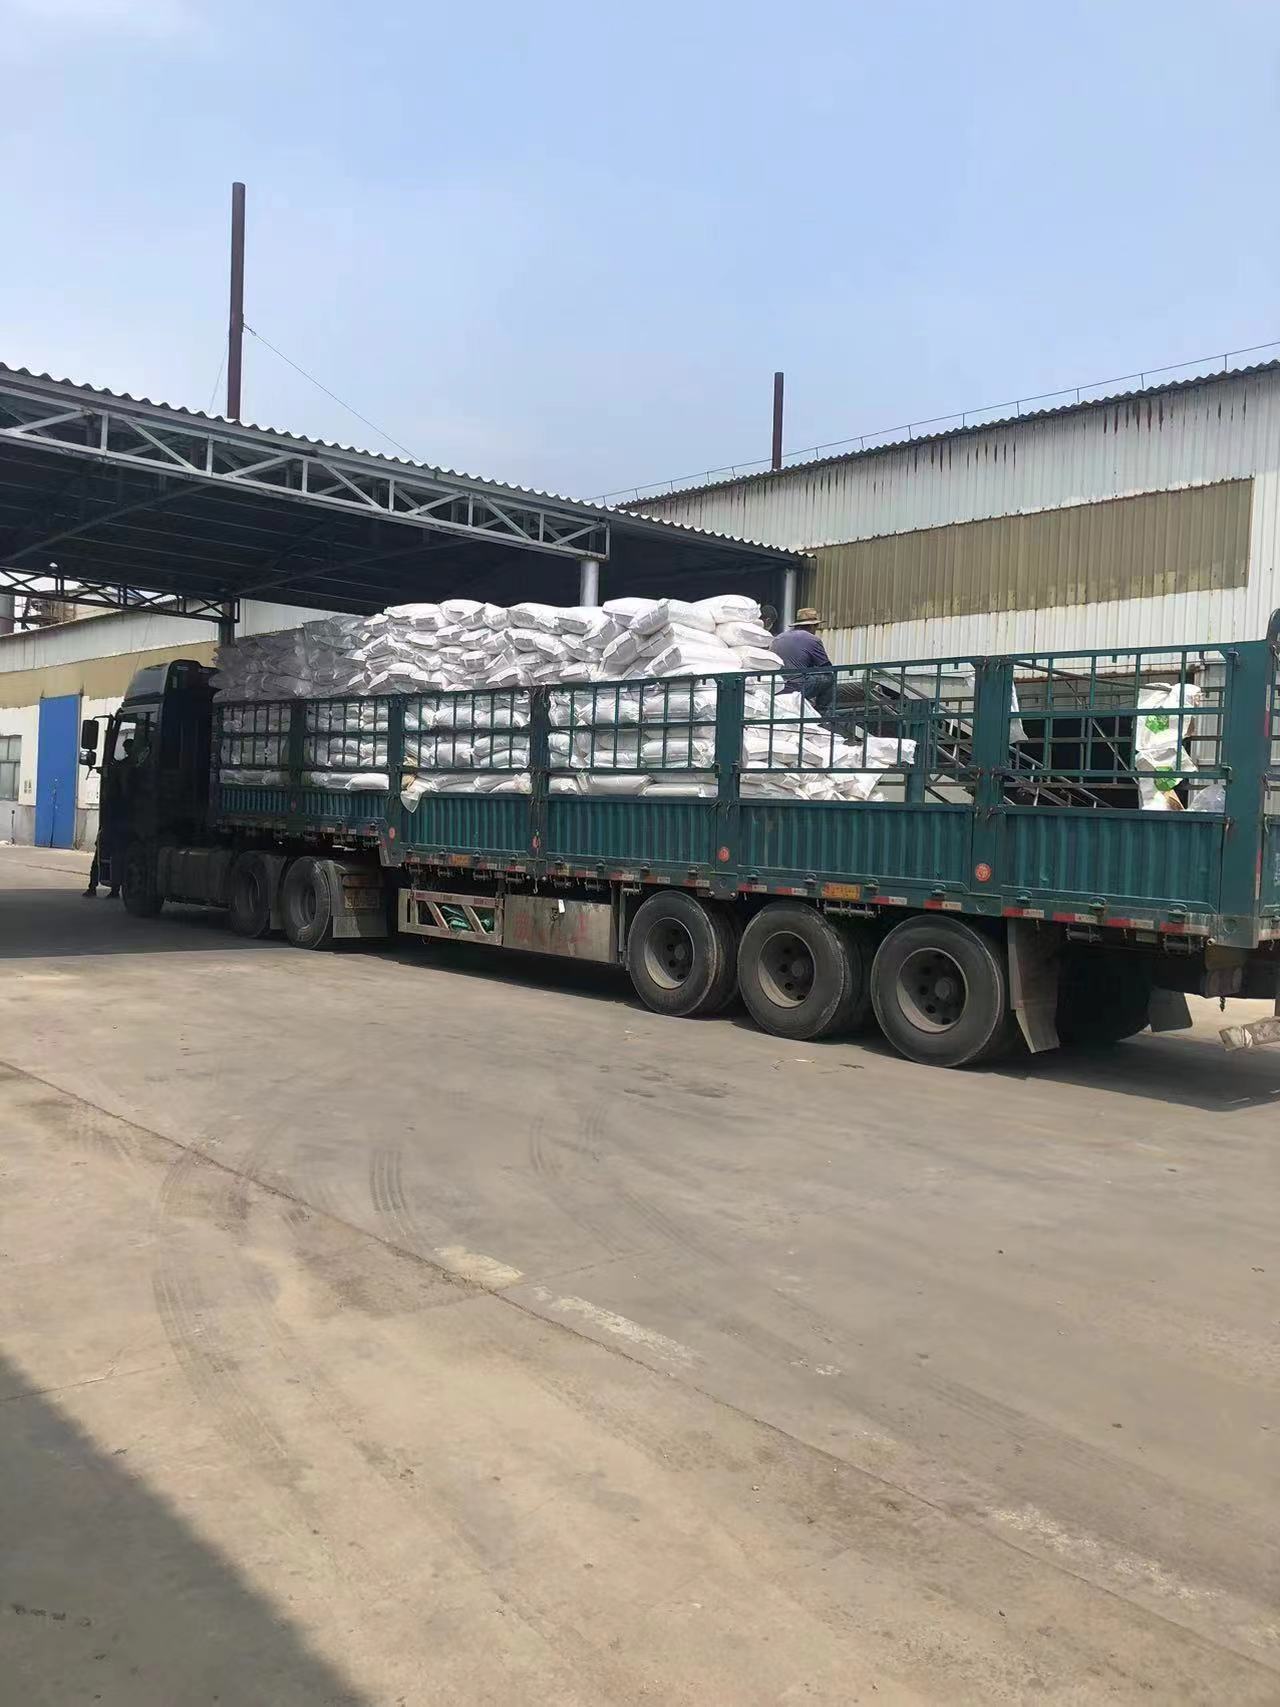 HPMC price Joint Filler additives HPMC Cellulose Ether Building Material hydroxypropyl methyl cellulose